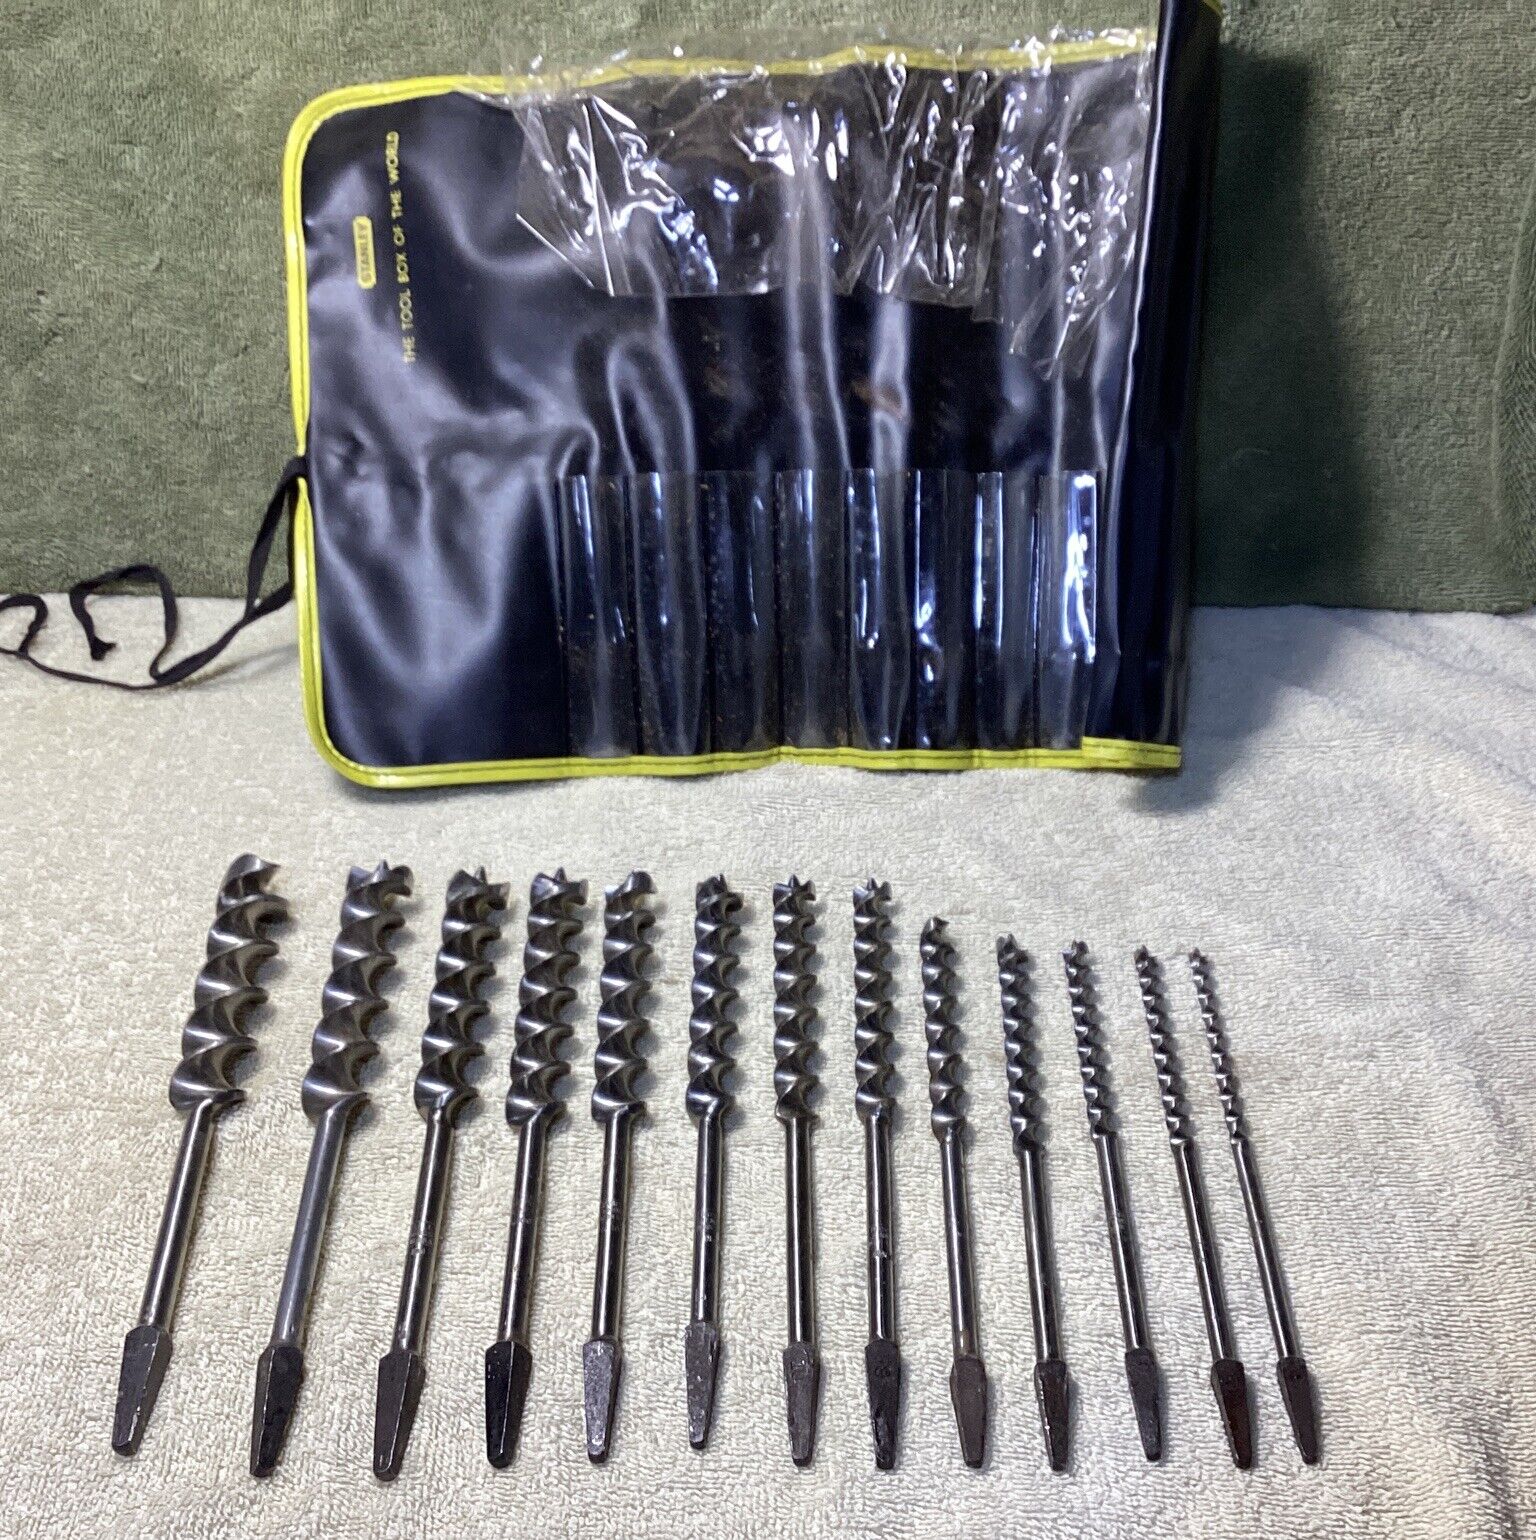 RUSSELL JENNINGS/STANLEY NO.100 13 PC. AUGER BIT SET NO.4-16 1/4” TO 1”